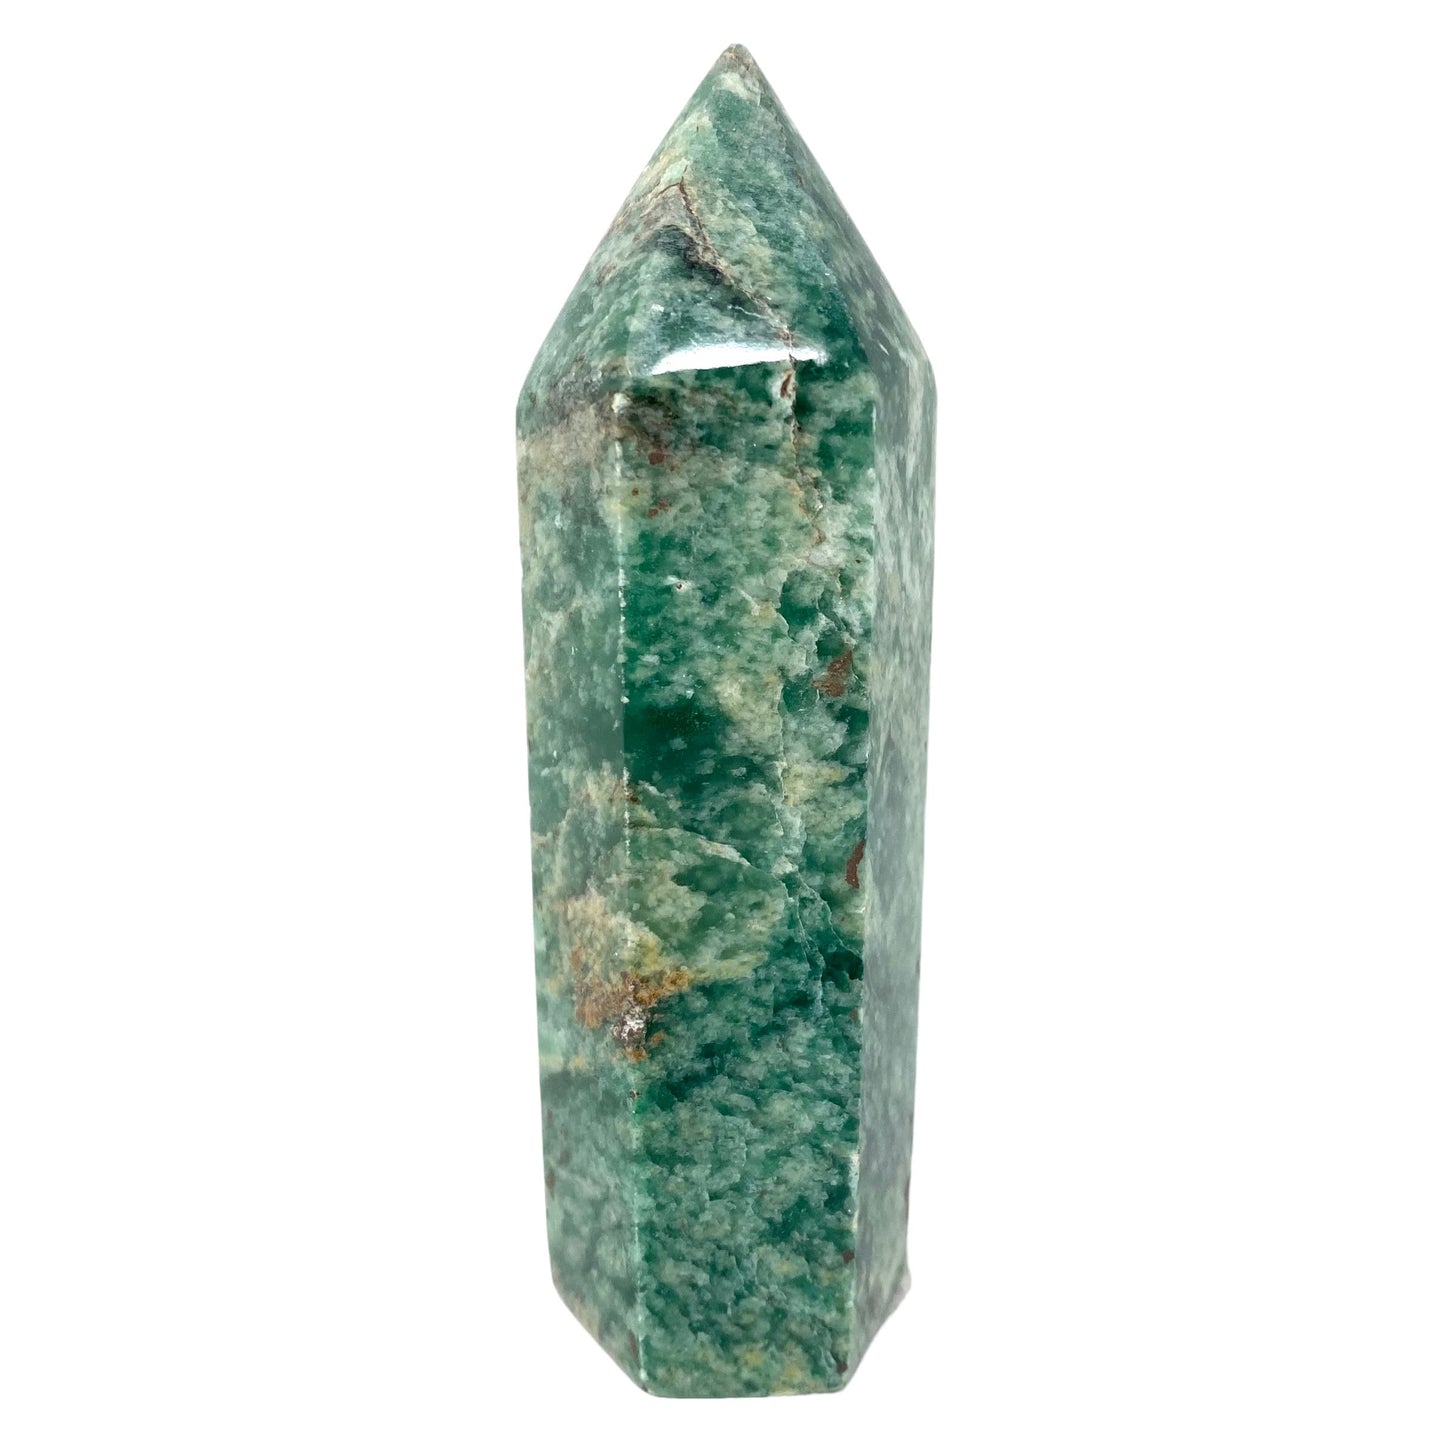 Green Aventurine Polished Crystal Towers from India